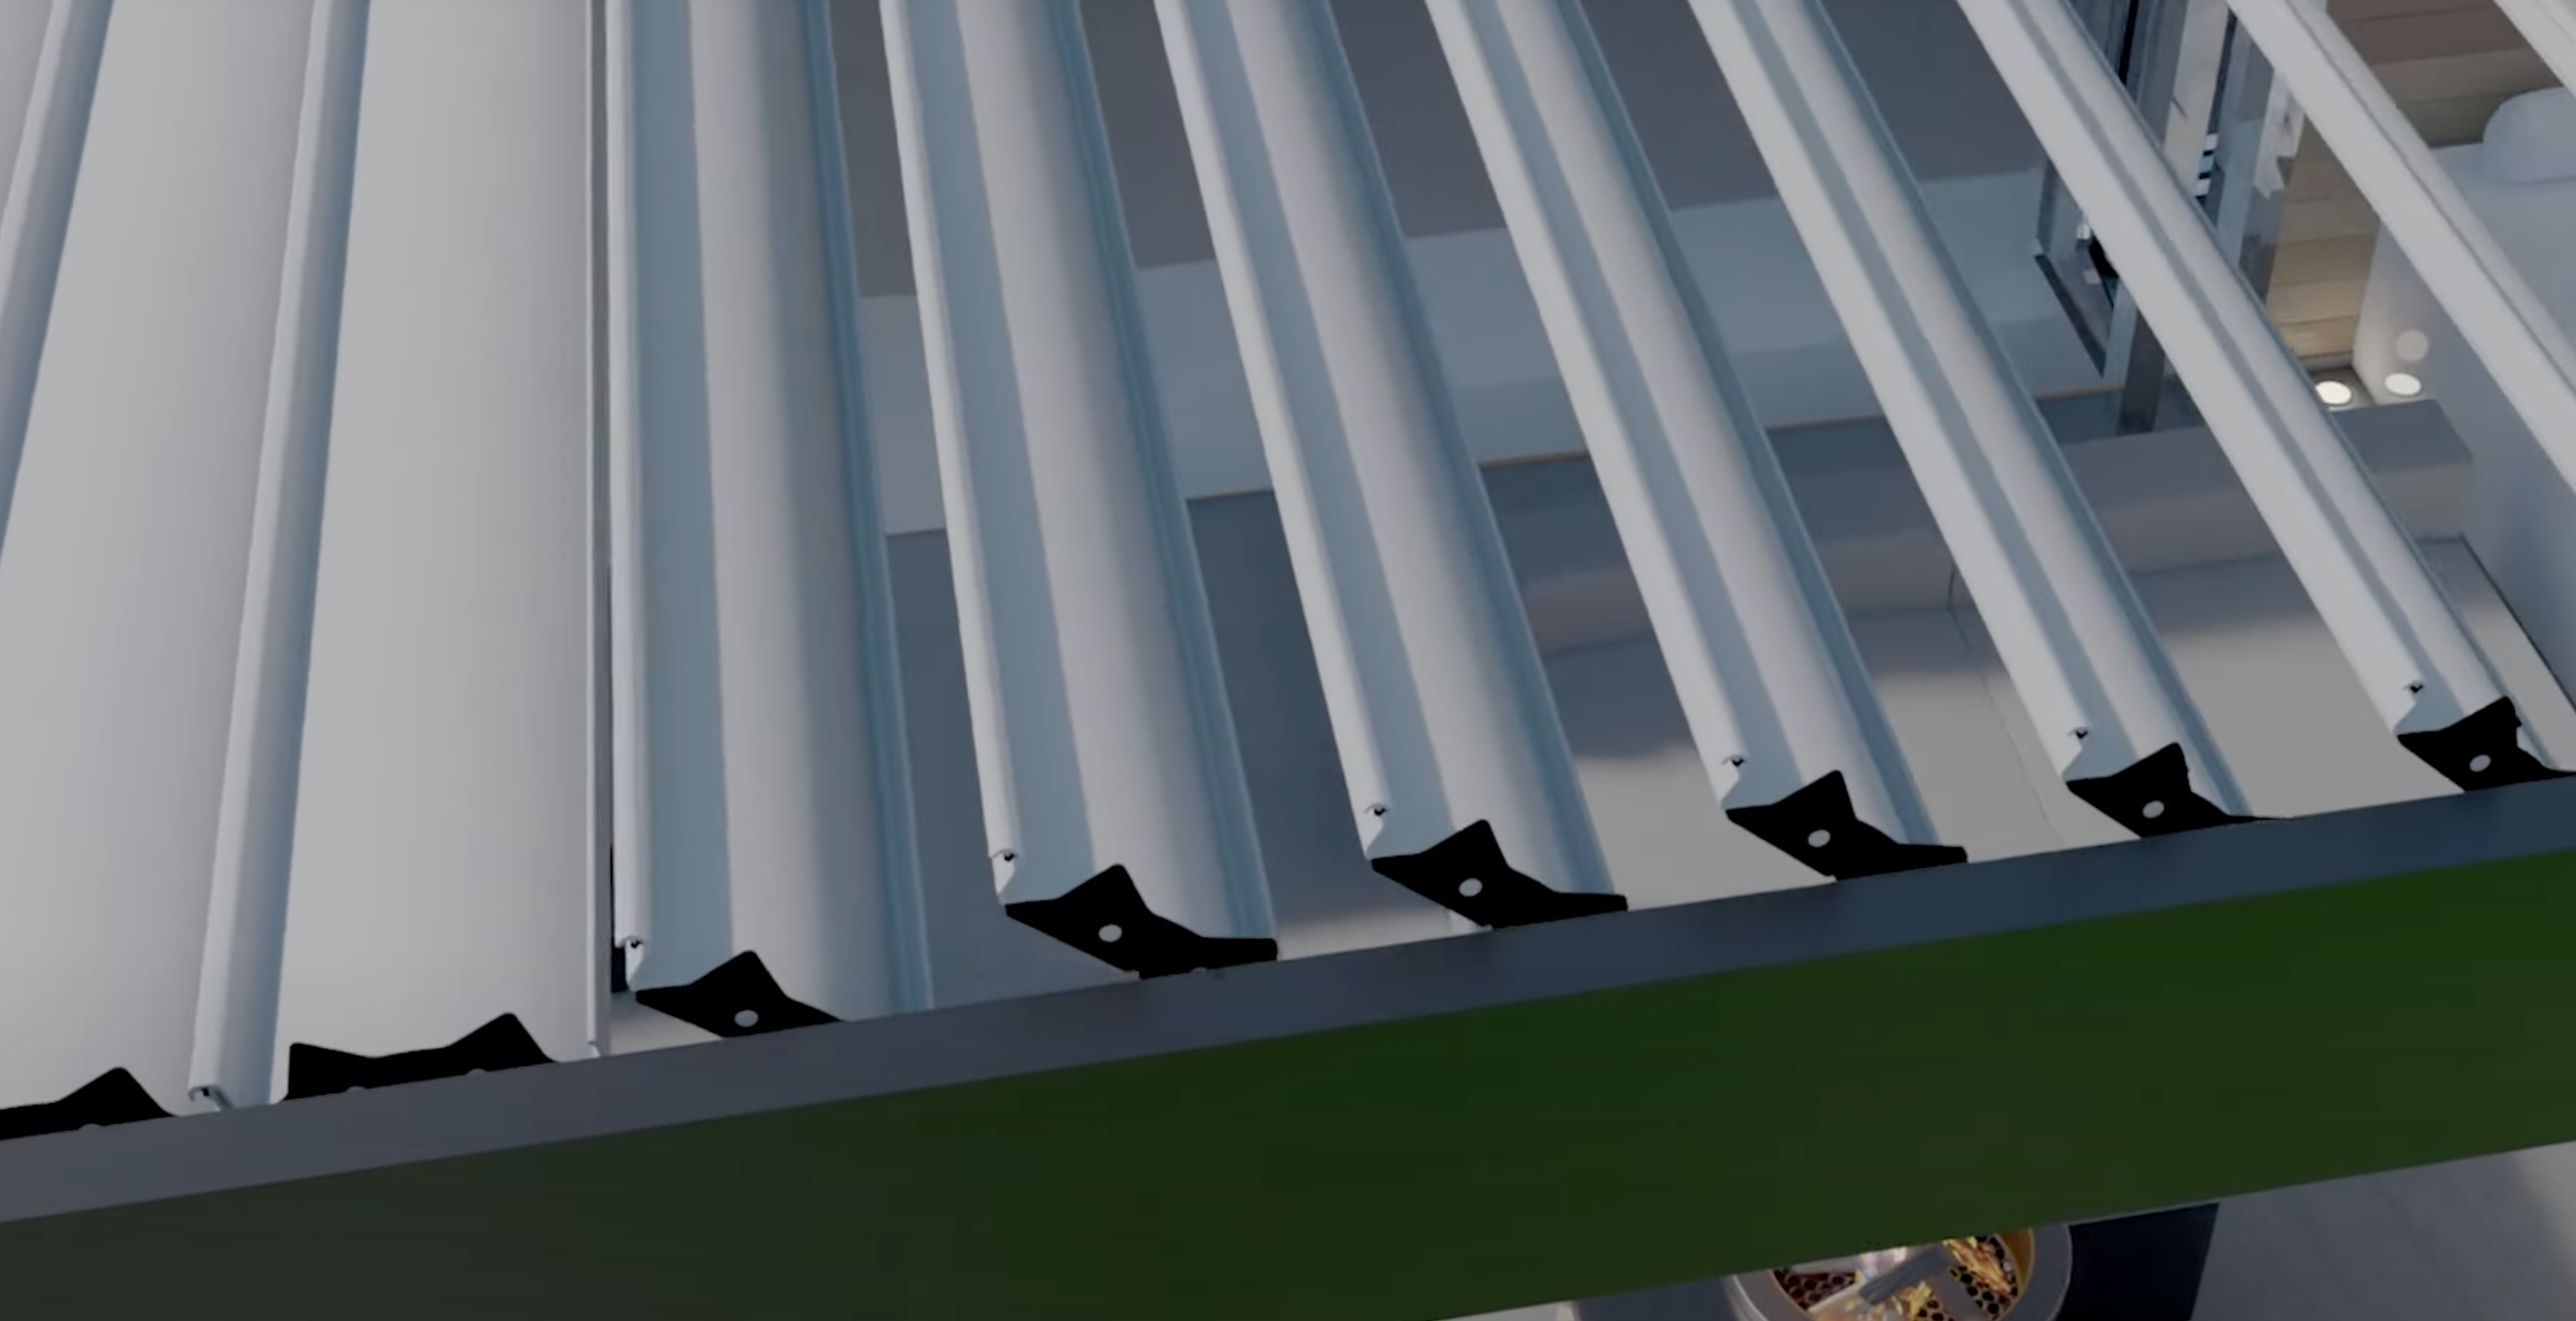 Louvers showing range of motion and opening capabilities